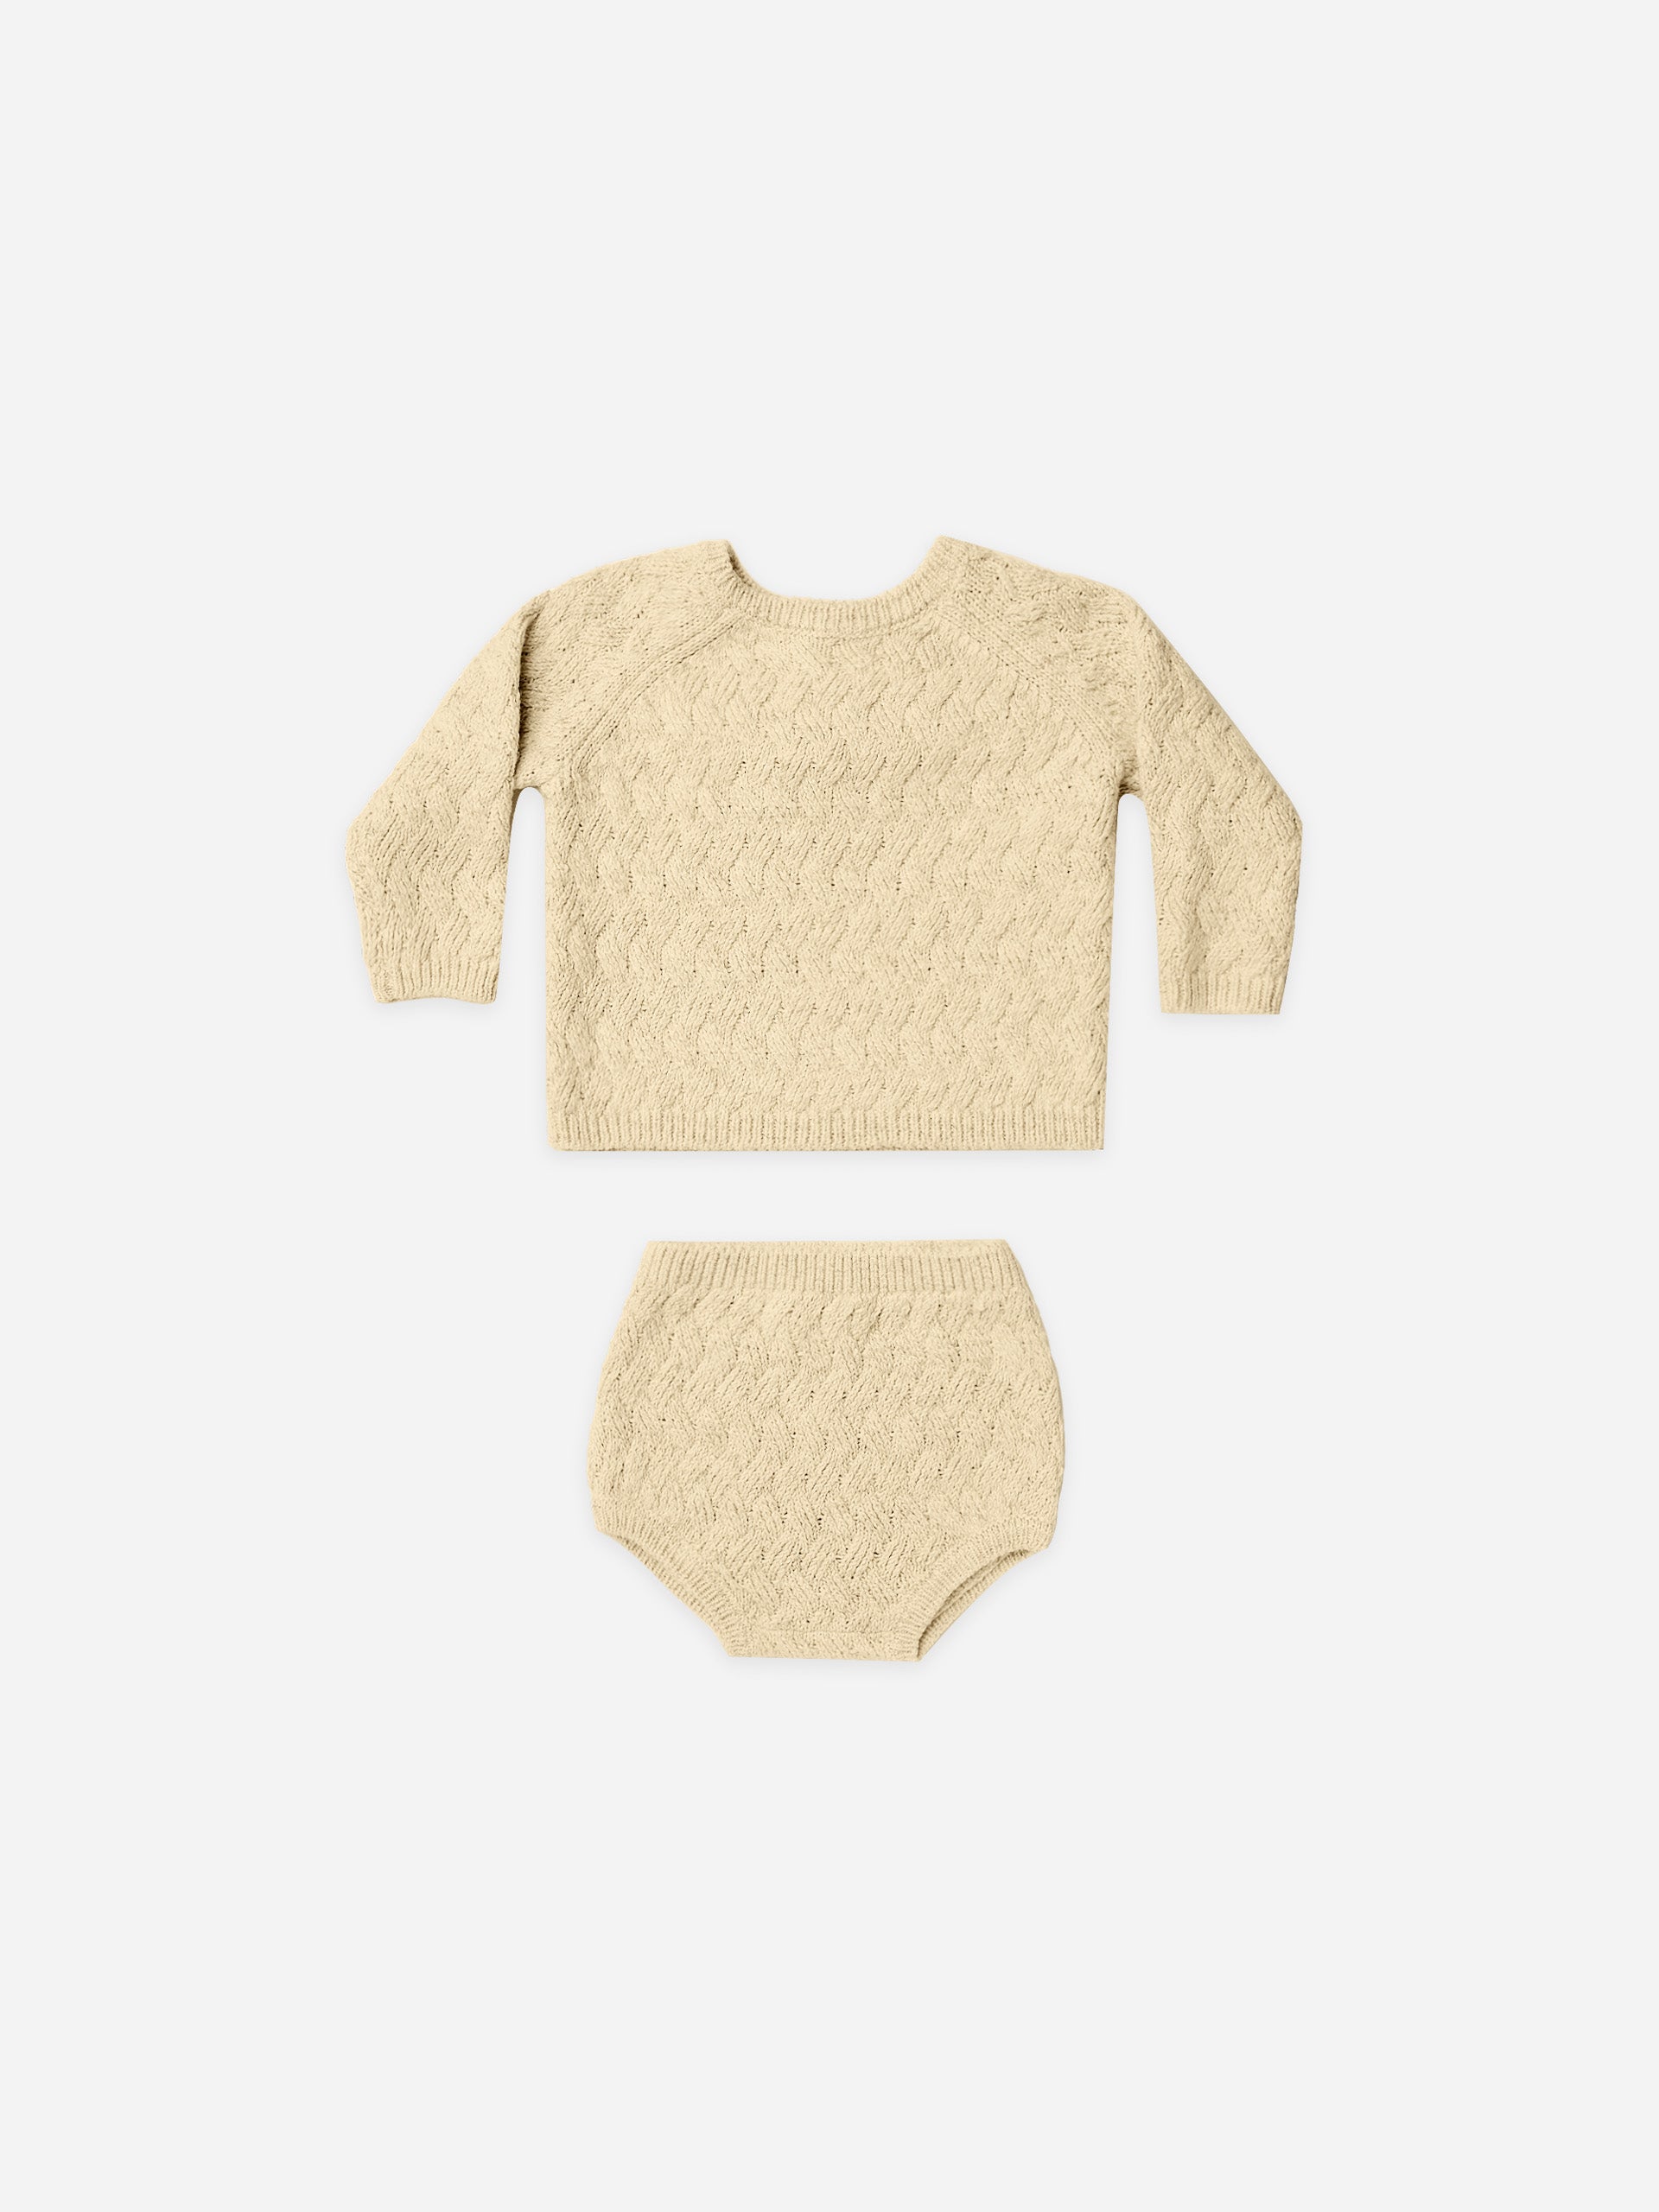 mira knit set | heathered yellow - Quincy Mae | Baby Basics | Baby Clothing | Organic Baby Clothes | Modern Baby Boy Clothes |